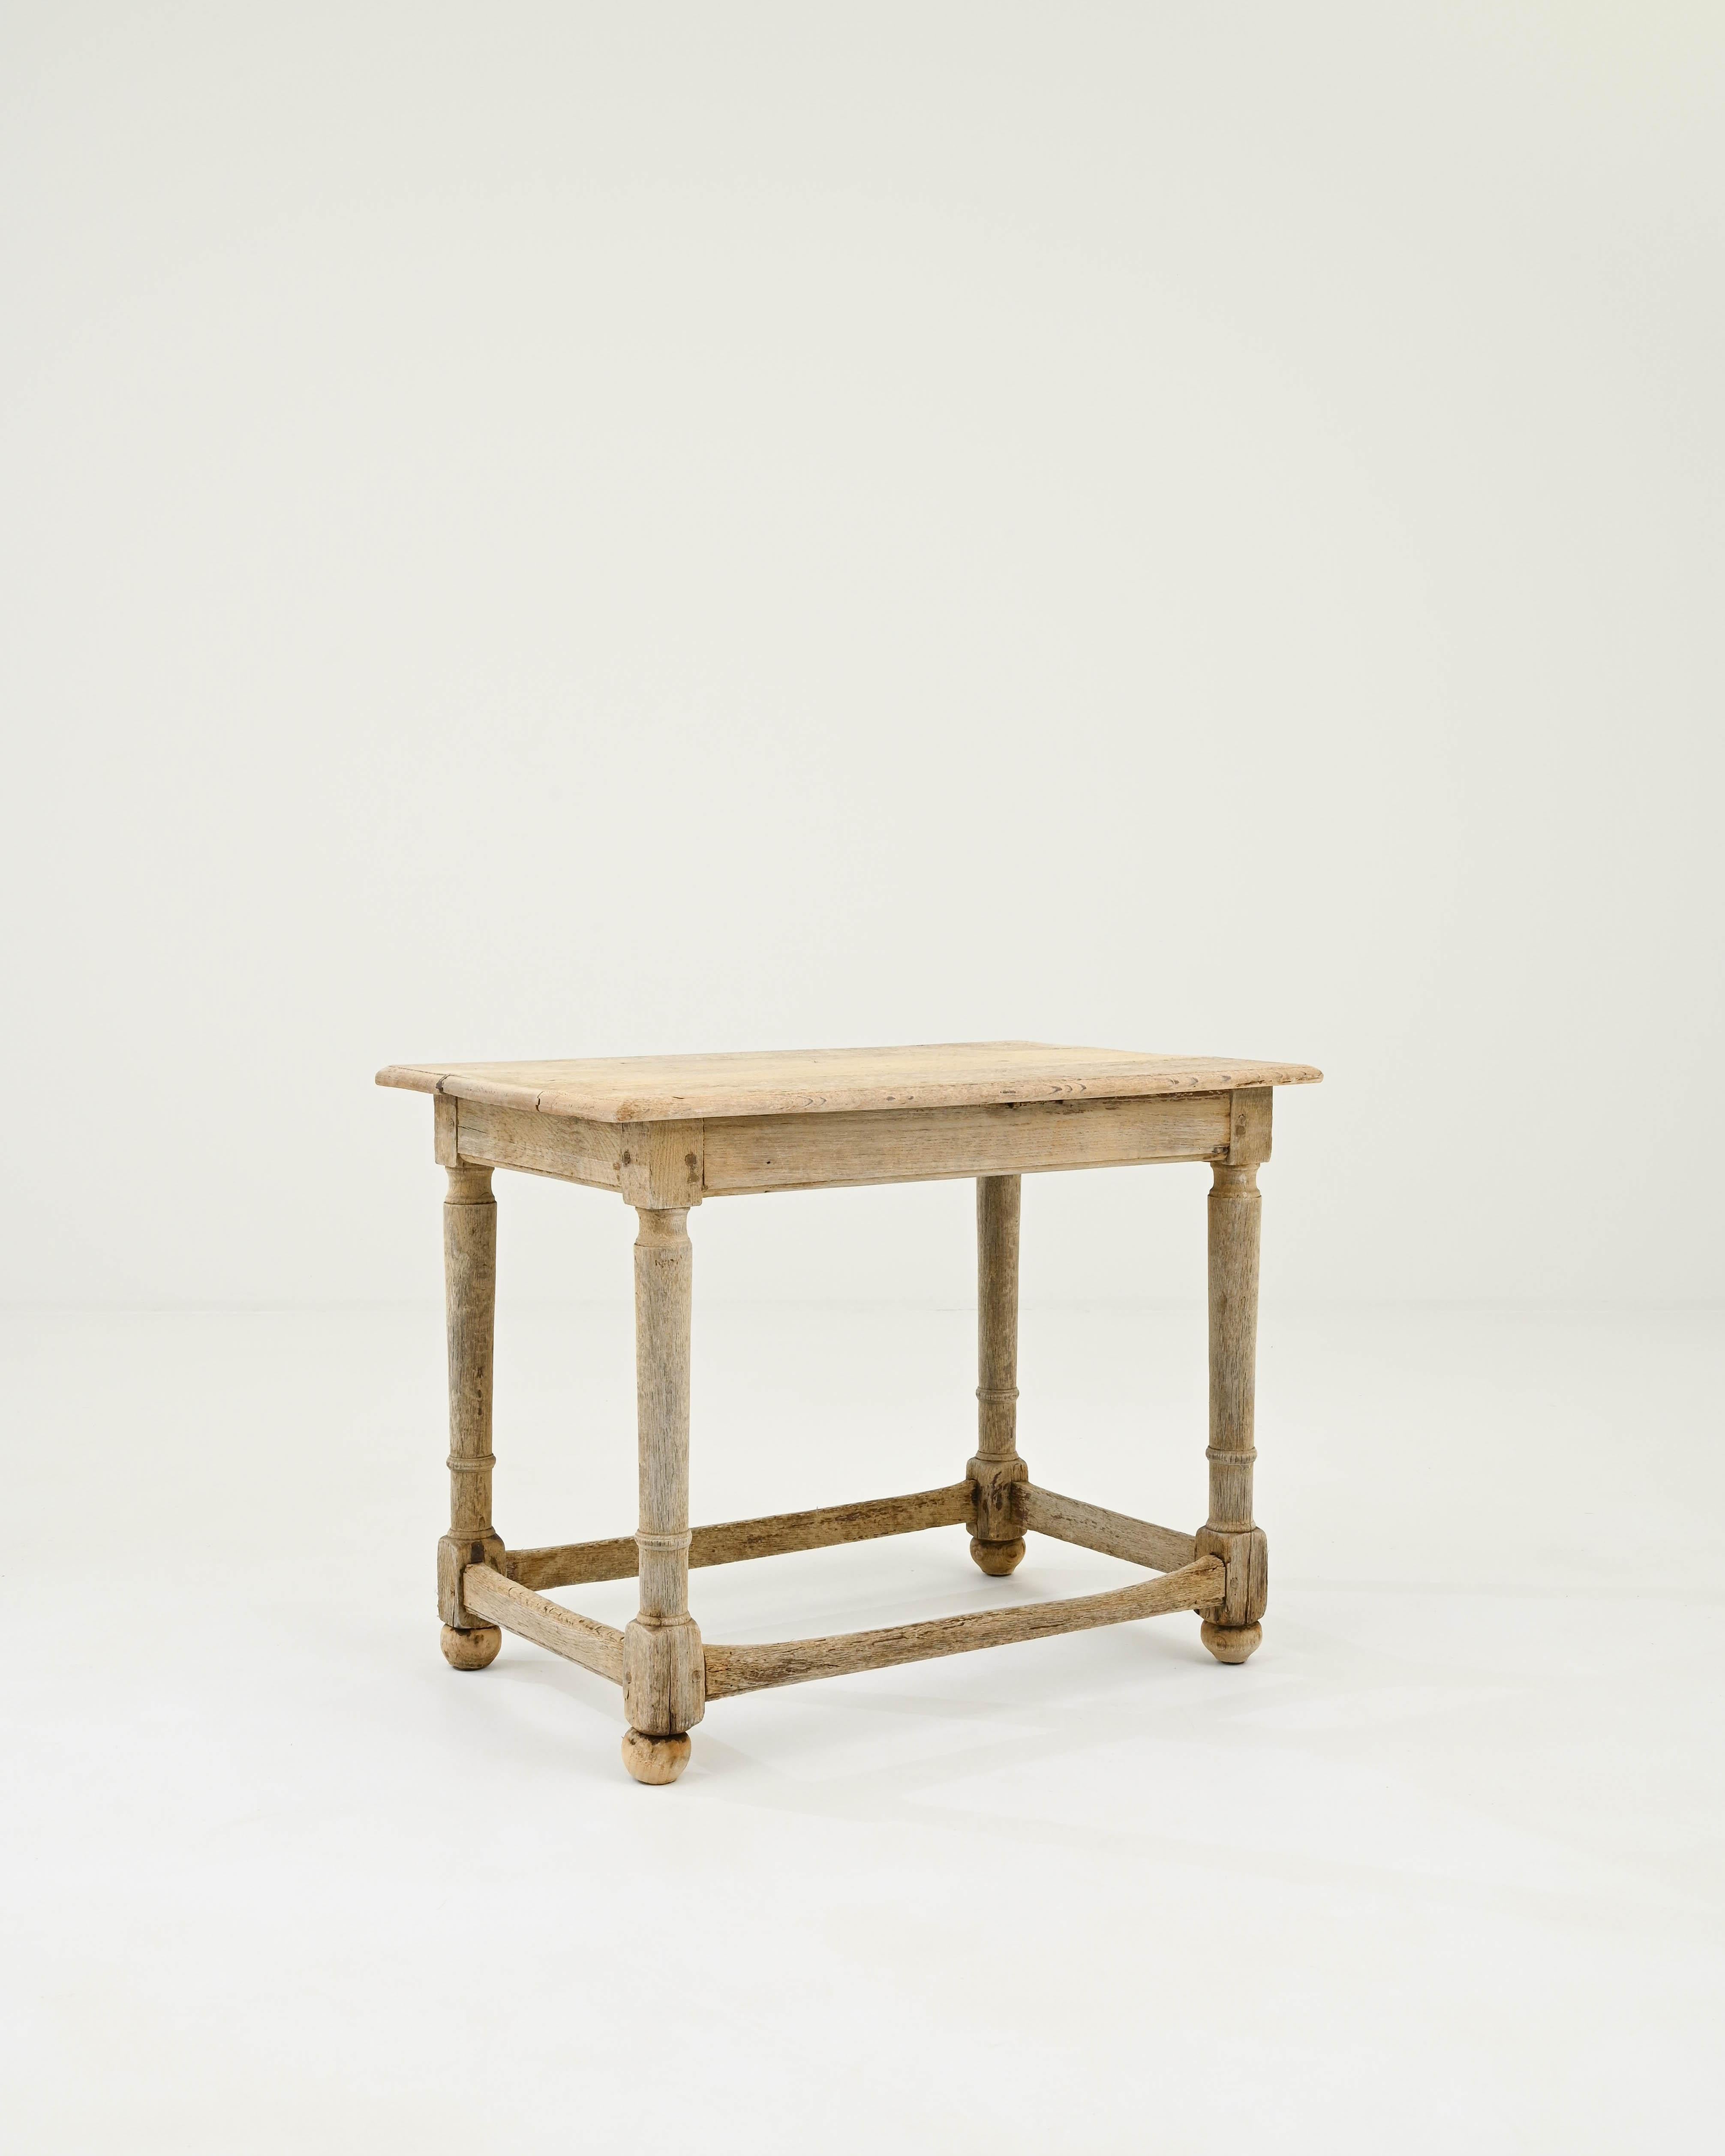 A wooden side table created in 19th century France. Rusticly simple, this farmhouse style side table projects an invitingly cheery glow. With lovingly lathed and carved legs, dowel peg connections, and mortise and tenon joinery,  traditional